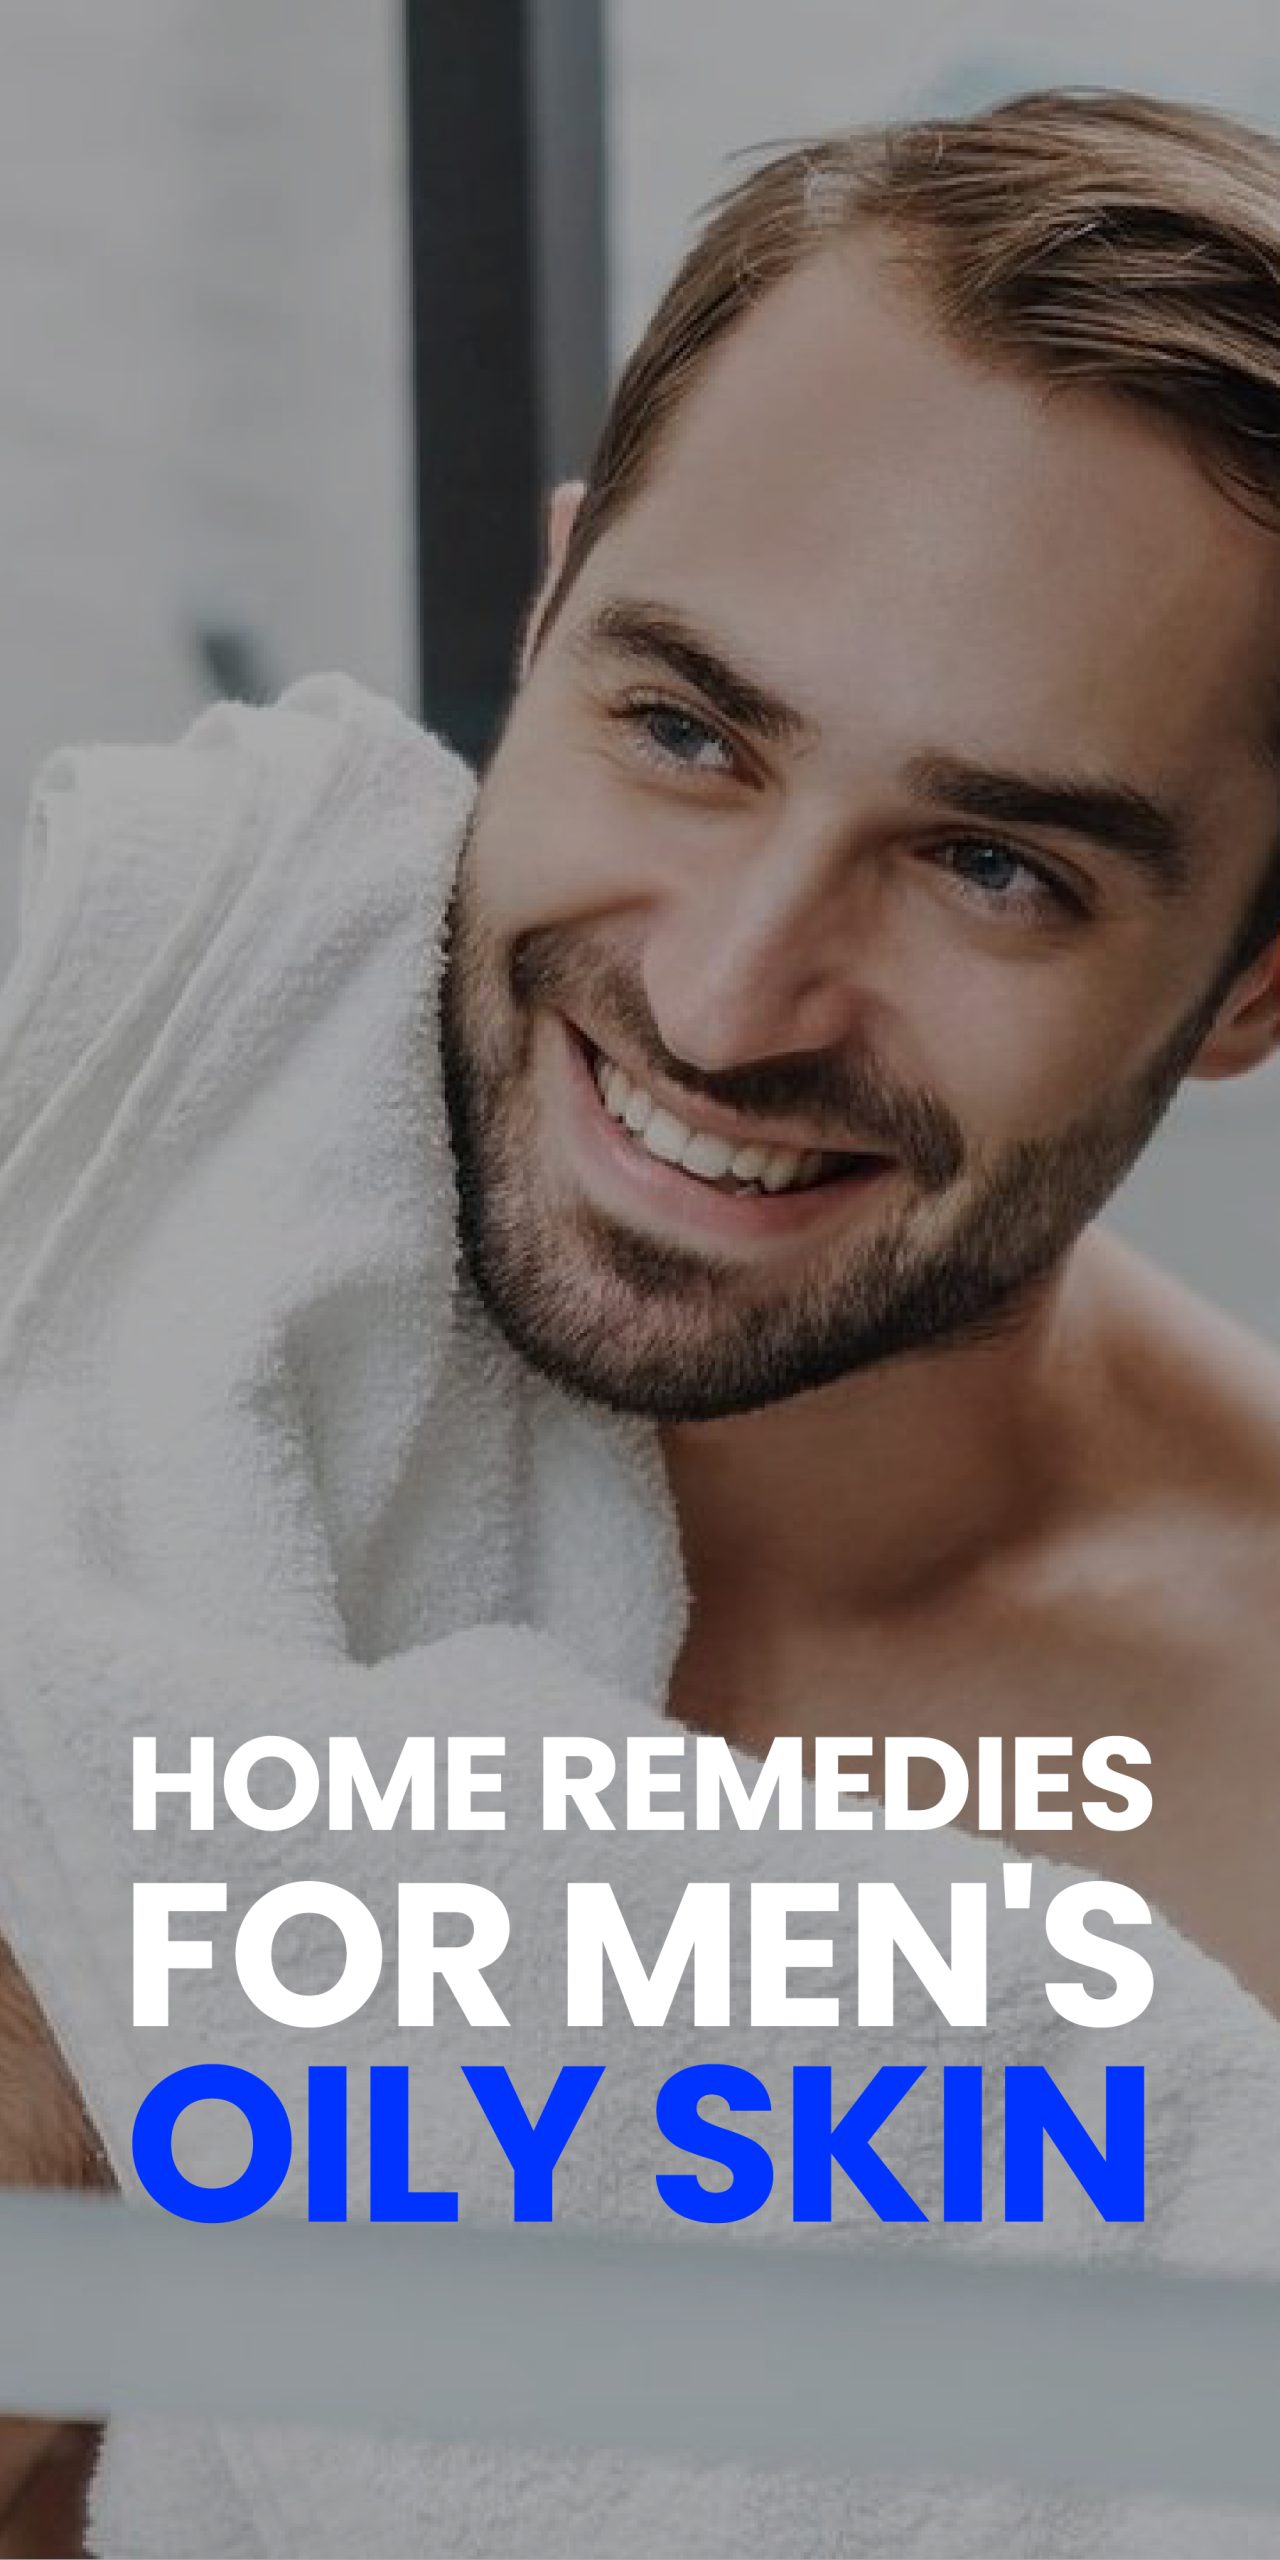 HOME REMEDIES FOR MEN’S OILY SKIN